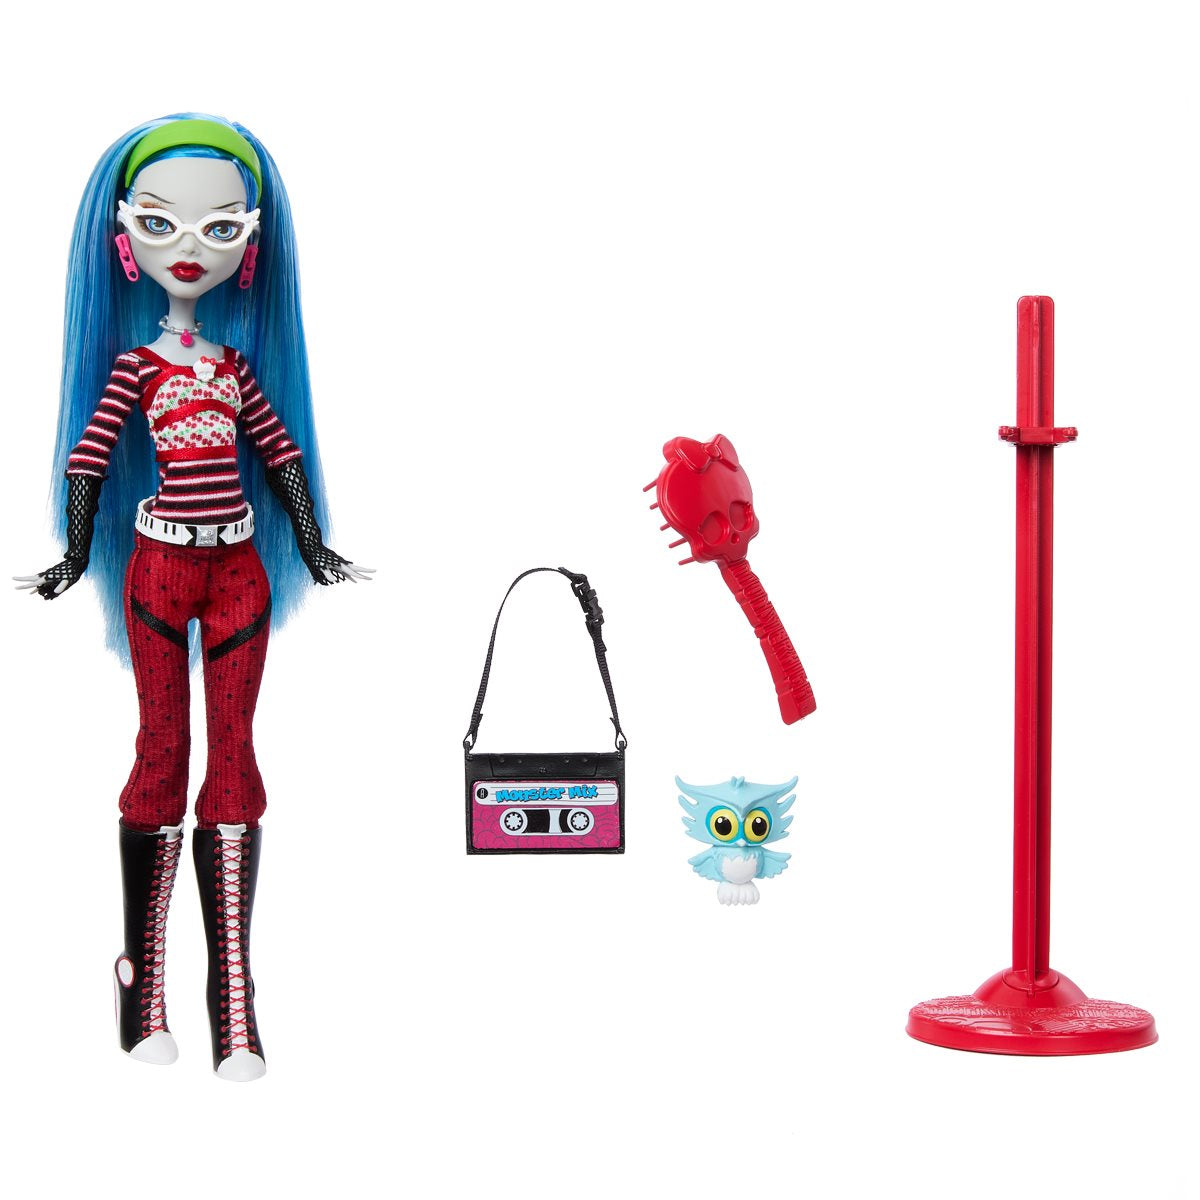 Booriginal Creeproduction Ghoulia Collectible Doll